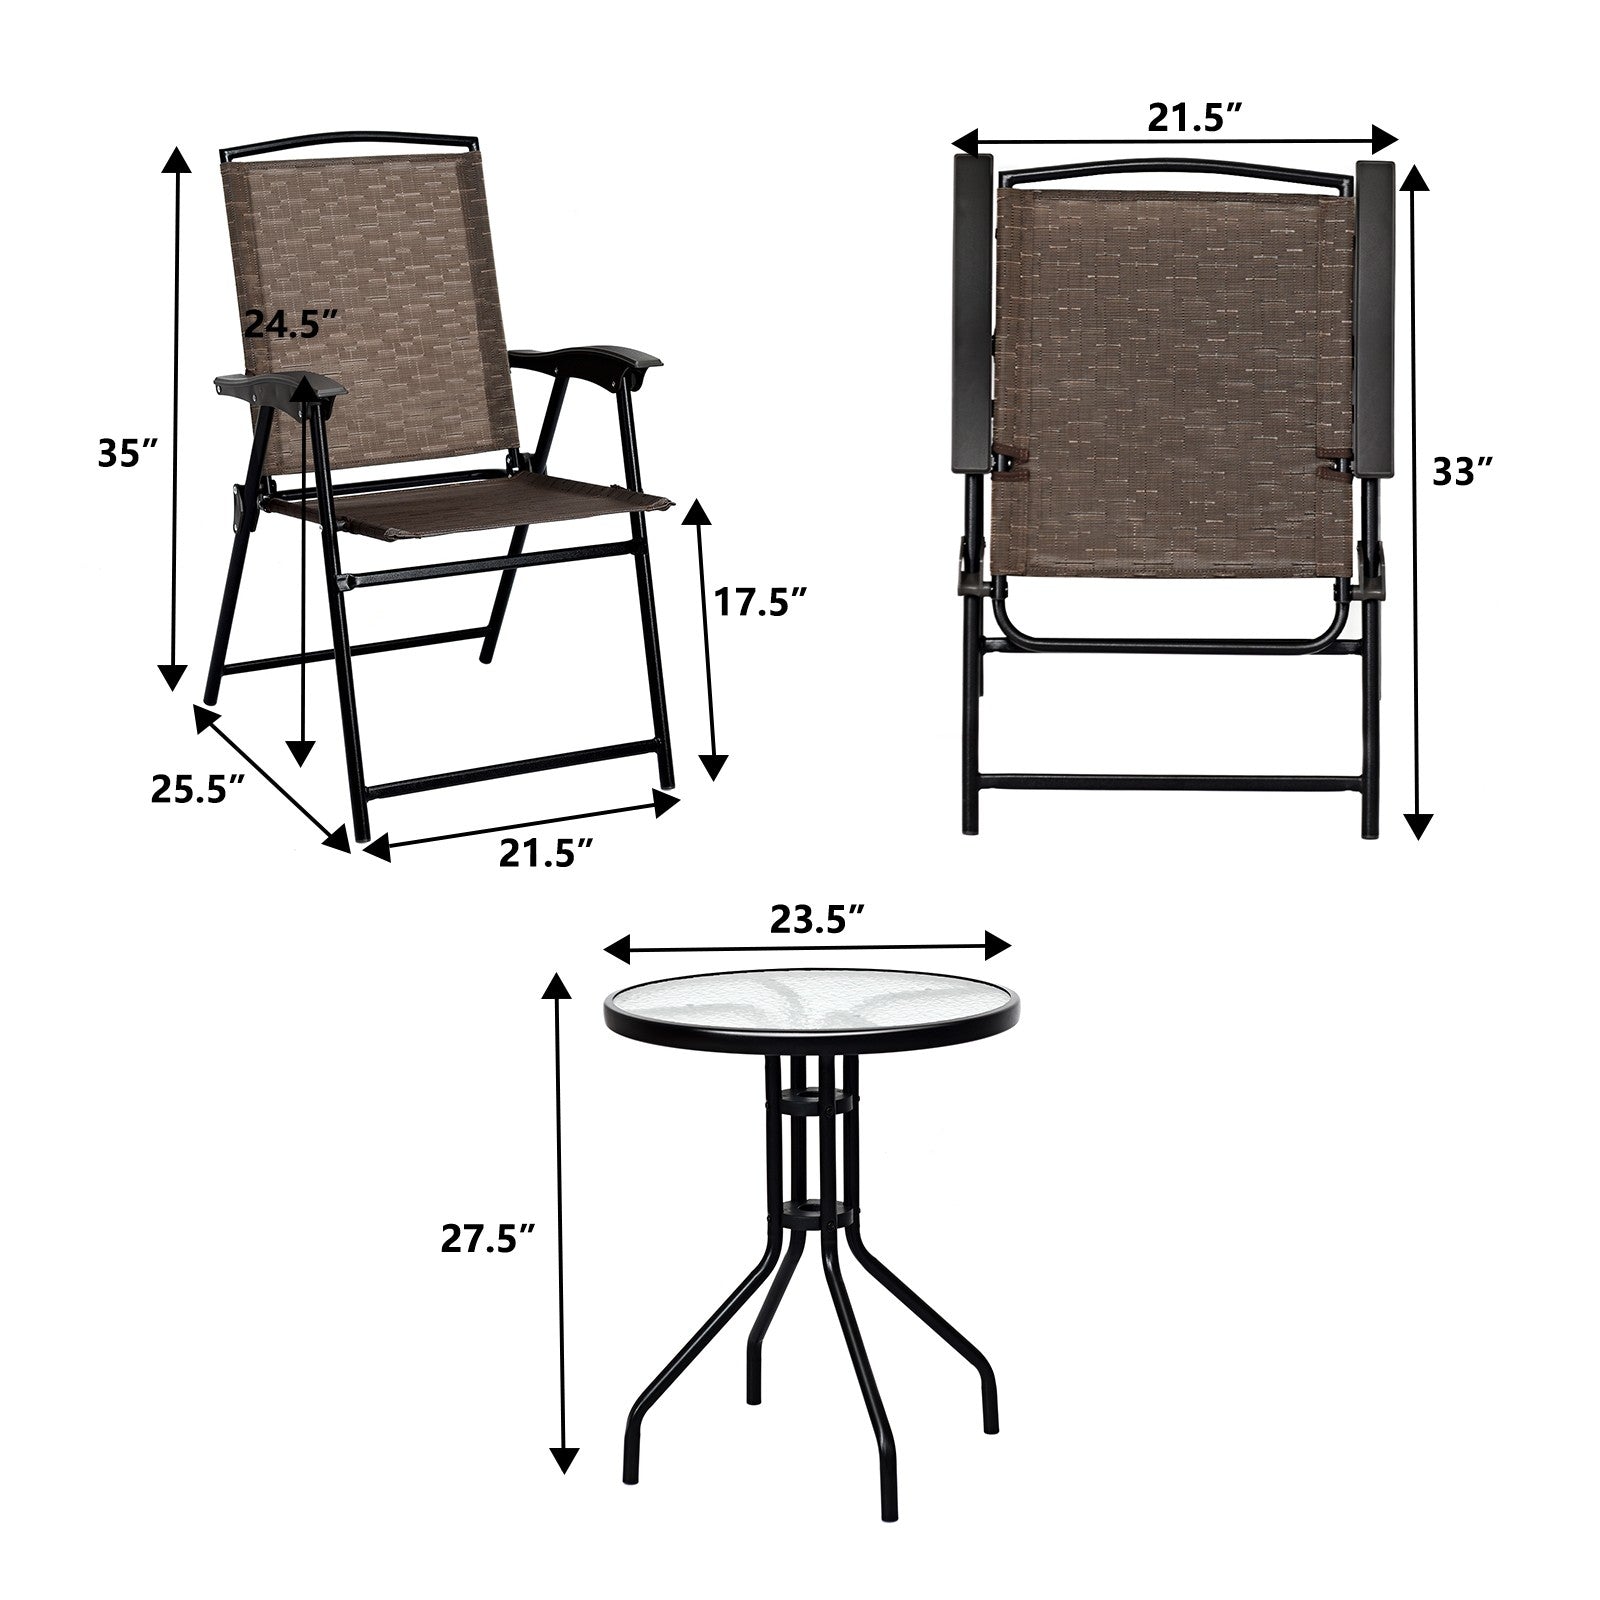 Giantex Patio Dining Set with 2 Patio Folding Chairs (Brown)